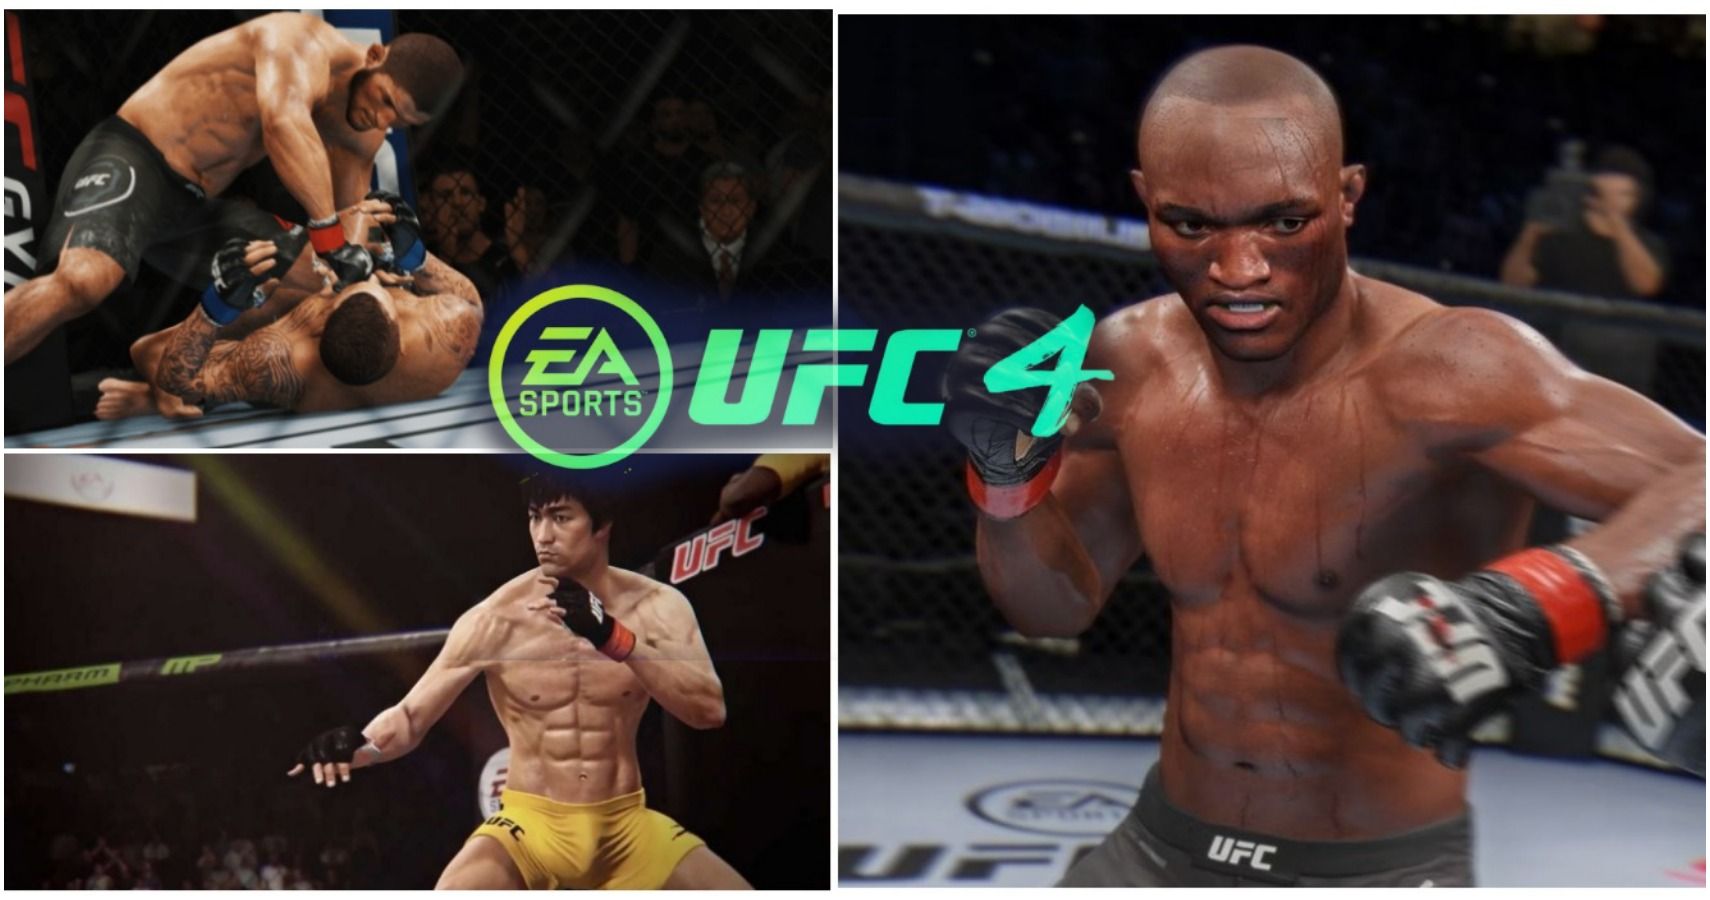 UFC 4 Free DLC - get Tyson Fury and Anthony Joshua as free add-ons